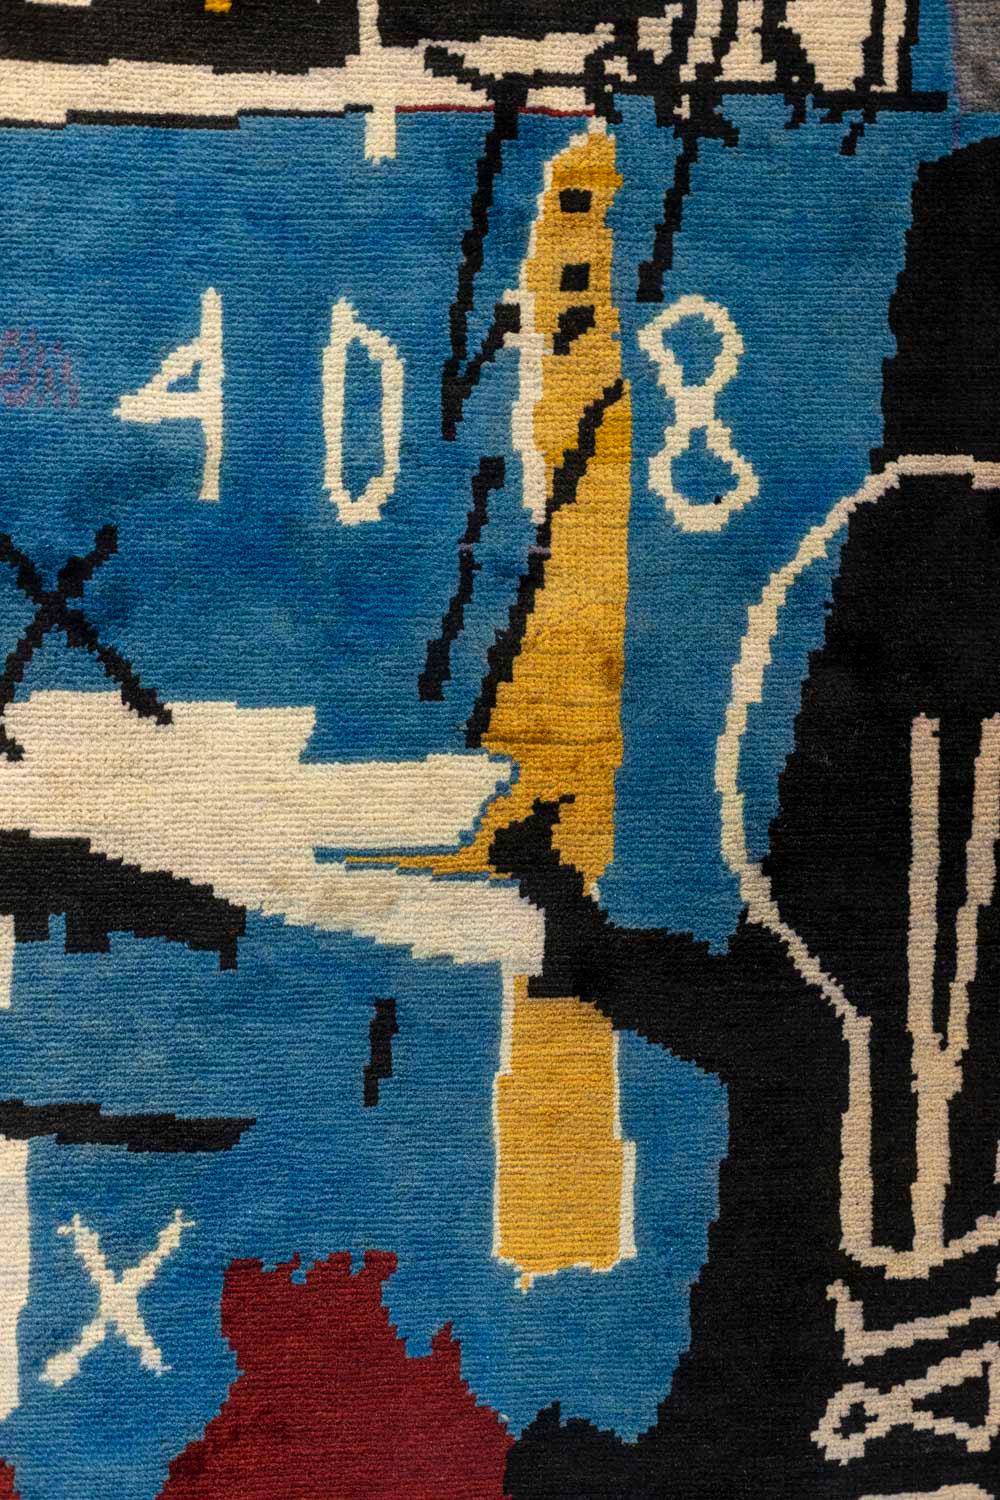 Jean-Michel Basquiat, in the style of. 

Rug, or tapestry. Handmade in Merino wool, realized with natural dyes.

Contemporary work.

Dimensions : H 300 x L 200 cm.